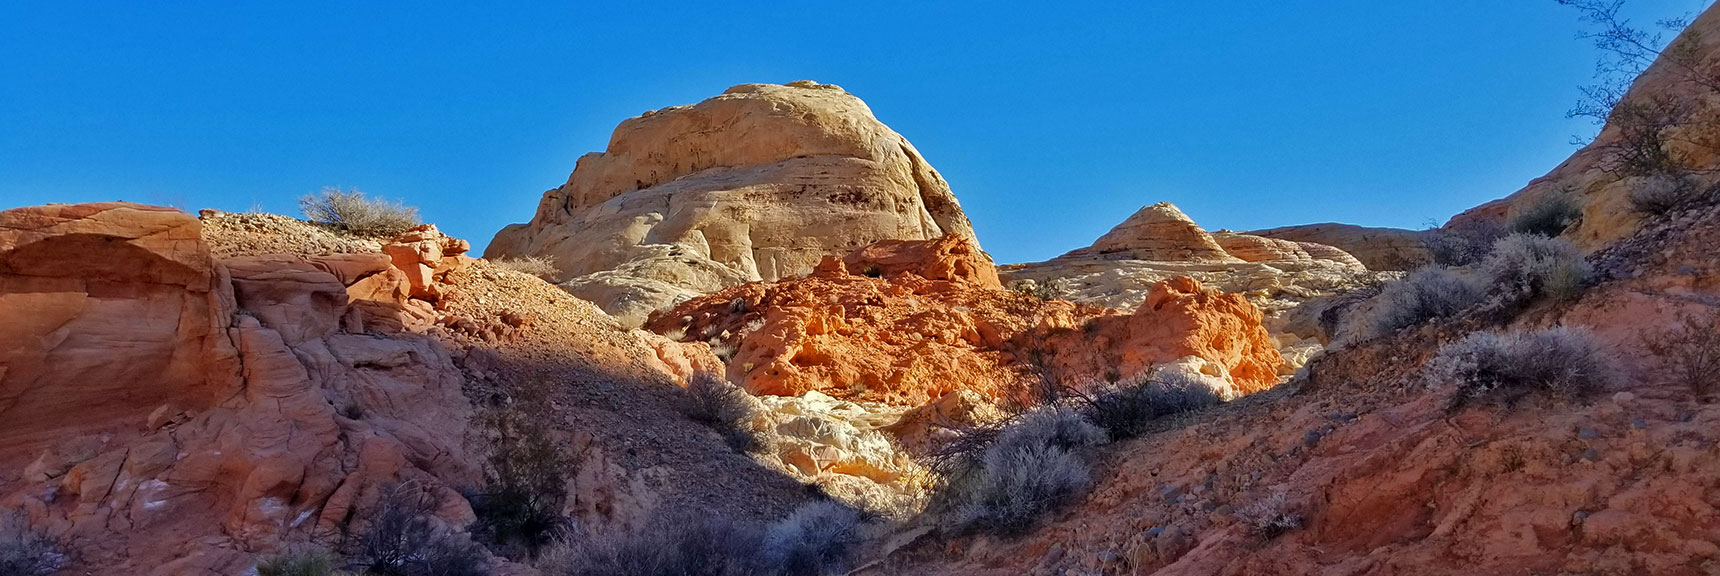 First Good View of White Domes Heading North on Prospect Trail in Valley of Fire State Park, Nevada